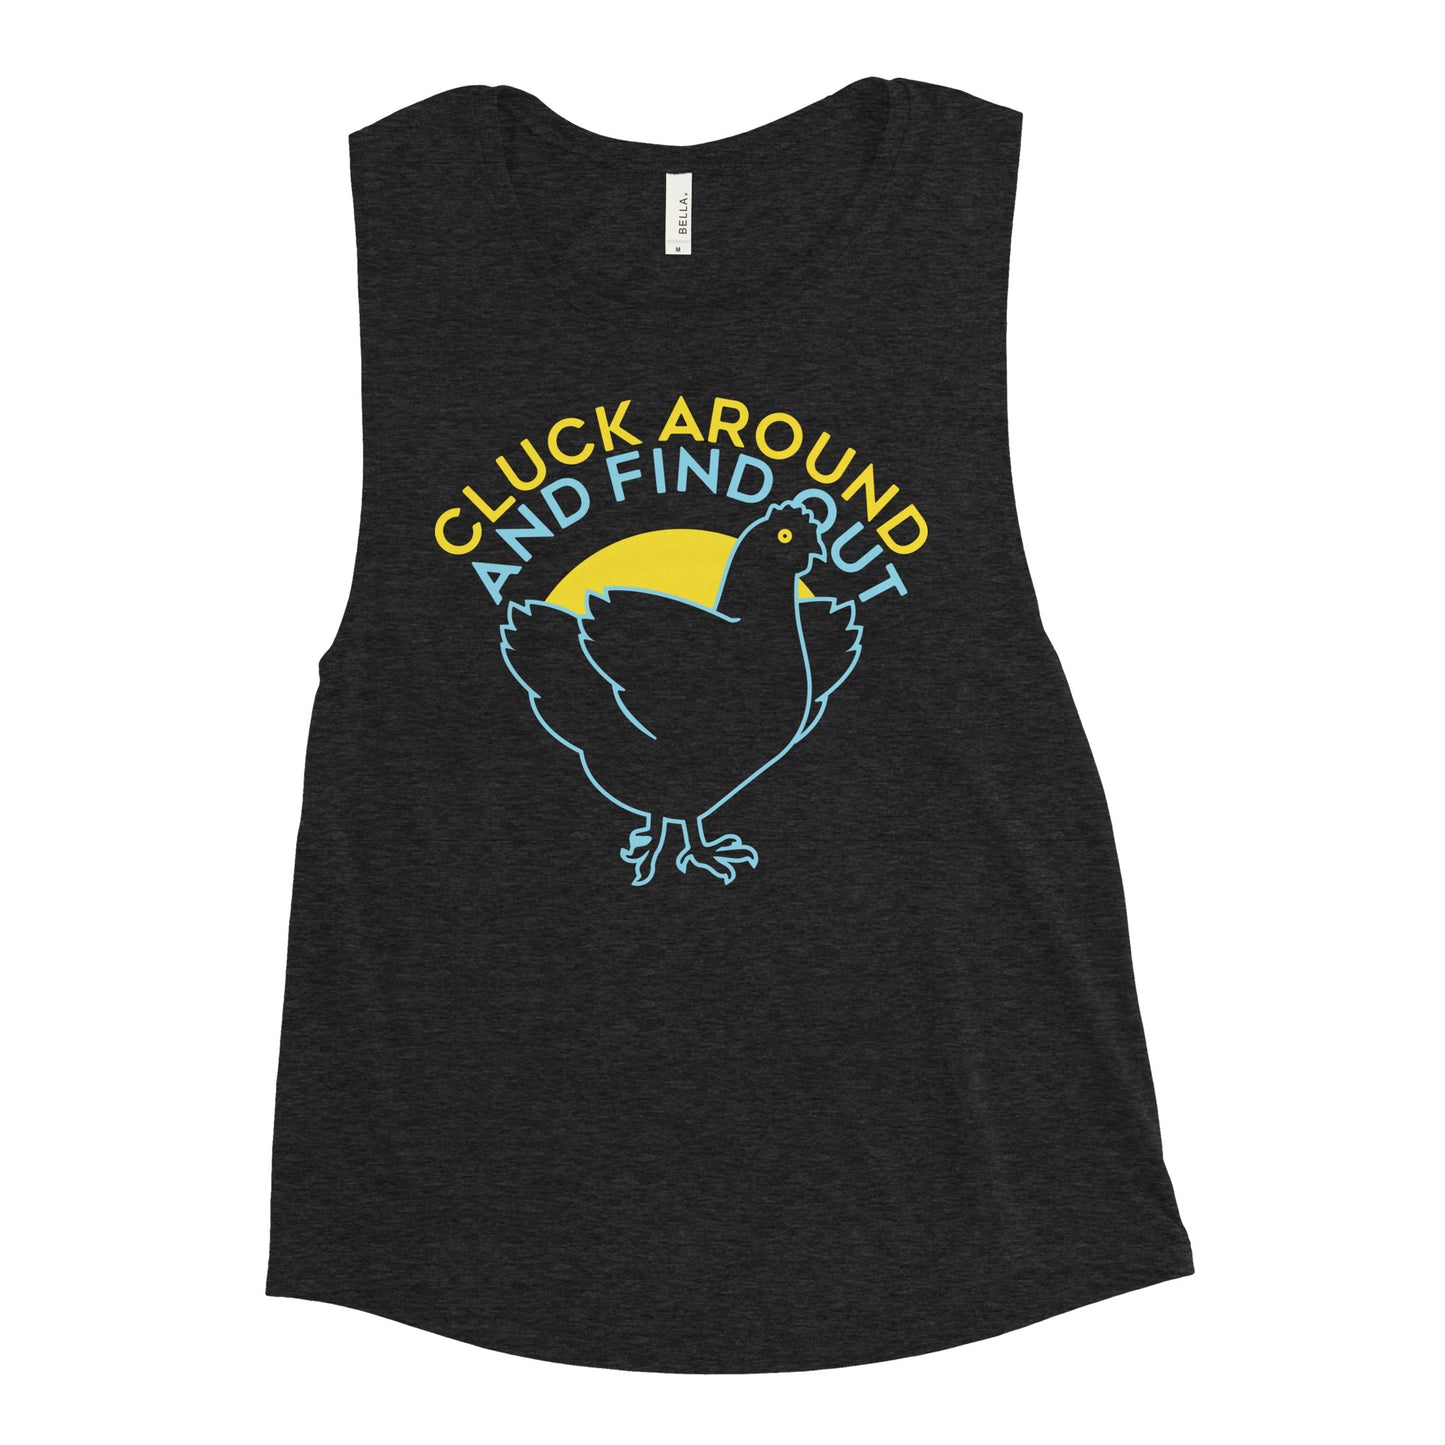 Cluck Around And Find Out Women's Muscle Tank